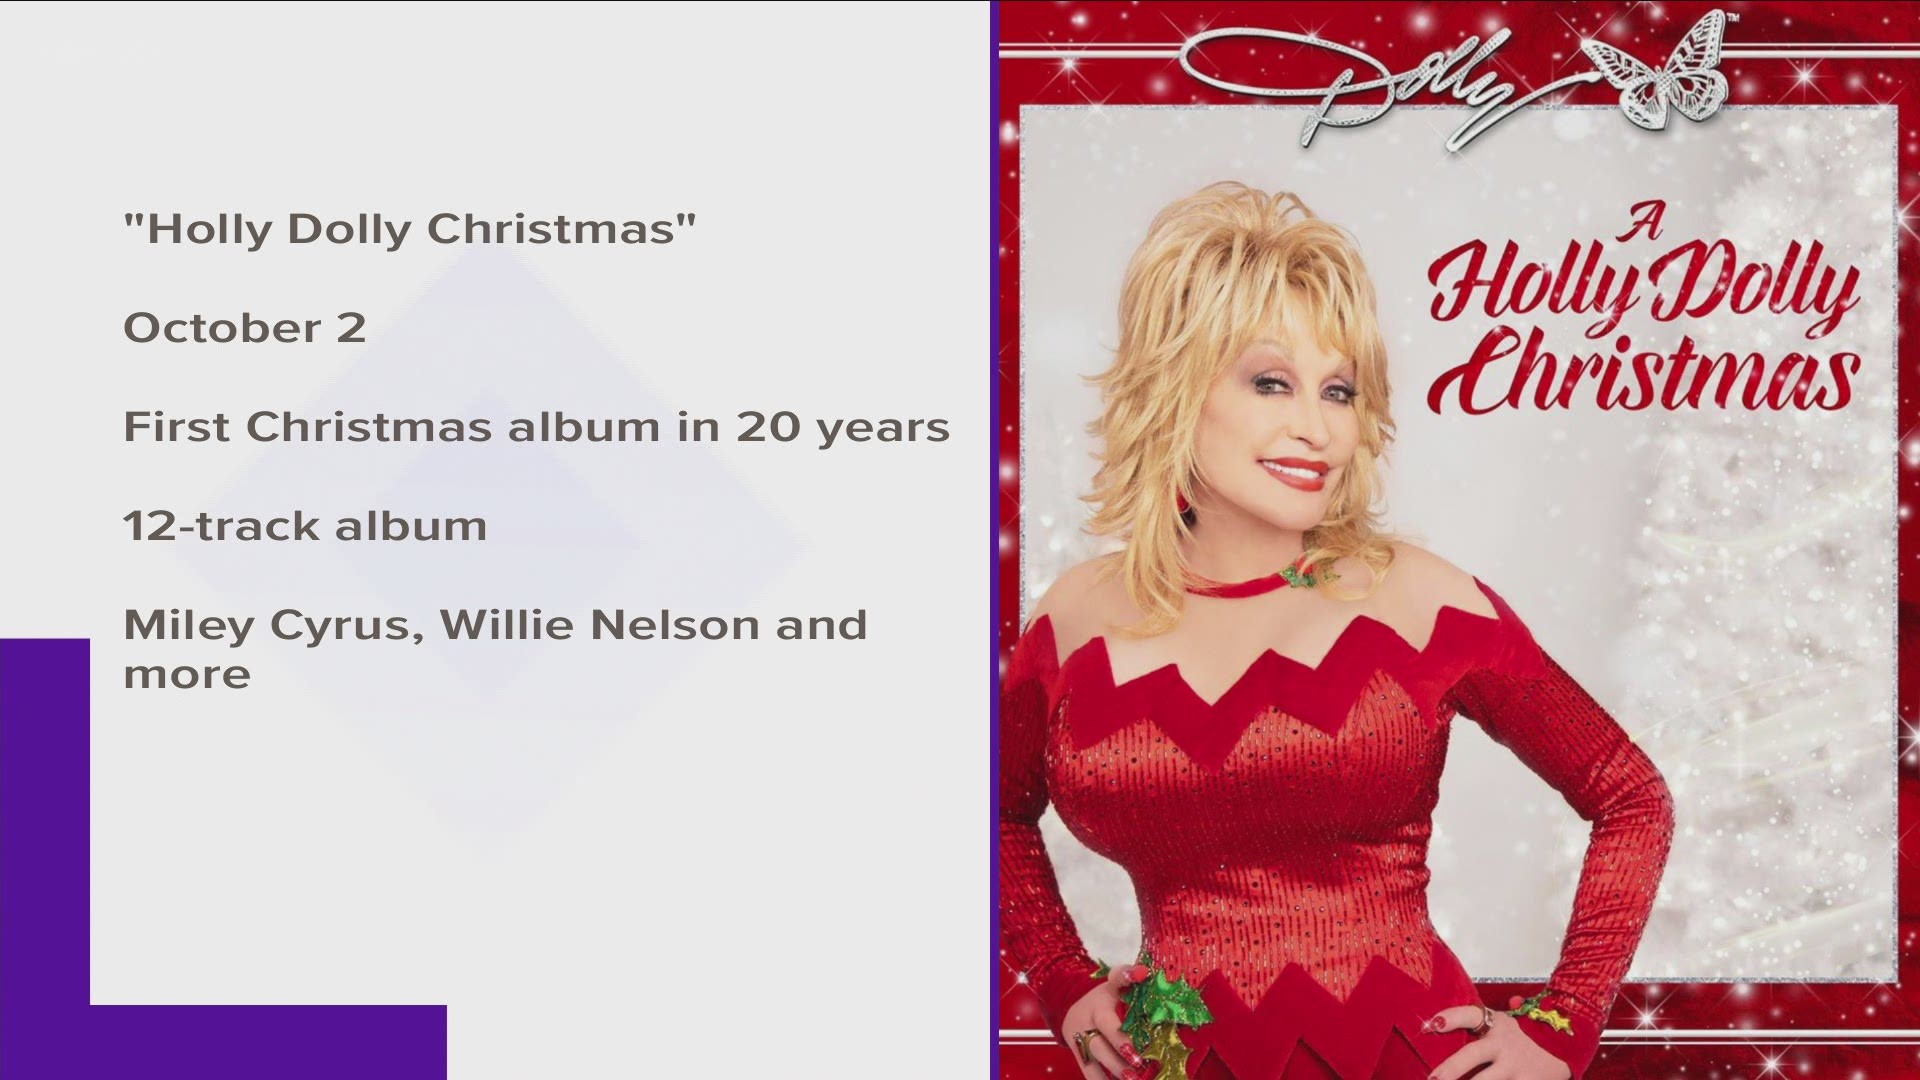 The Sevier County native is releasing her first Christmas album in 20 years called "Holly Dolly Christmas" on October 2.